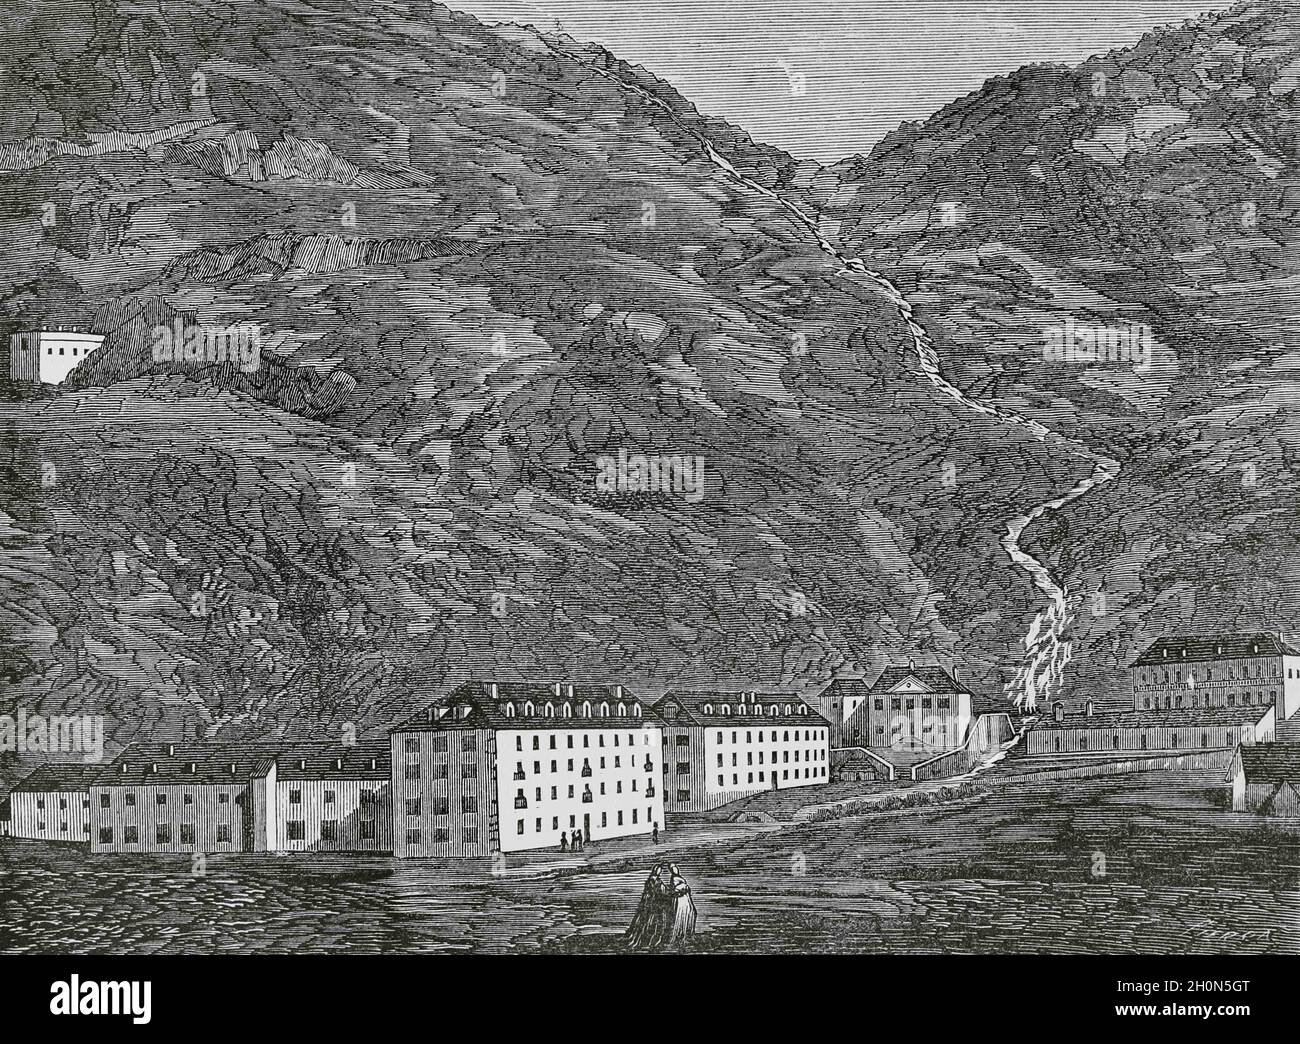 Spain, Aragon, Huesca province. Panticosa Baths. Panoramic view of the thermal complex. Engraving by Sierra. Cronica General de España, Historia Ilust Stock Photo